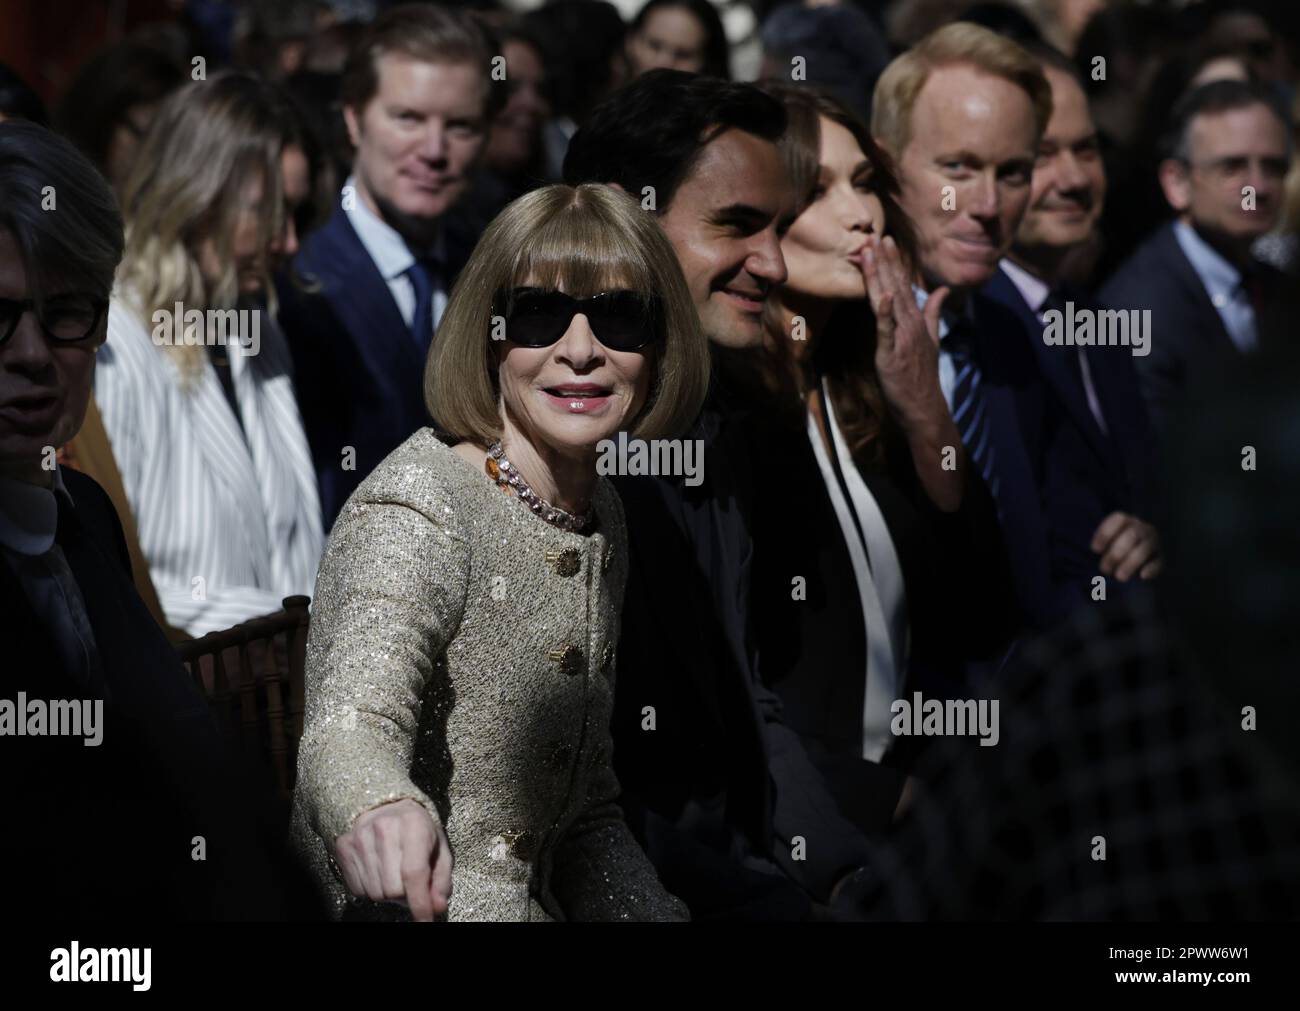 Louis Vuitton - Anna Wintour and Roger Federer at the Louis